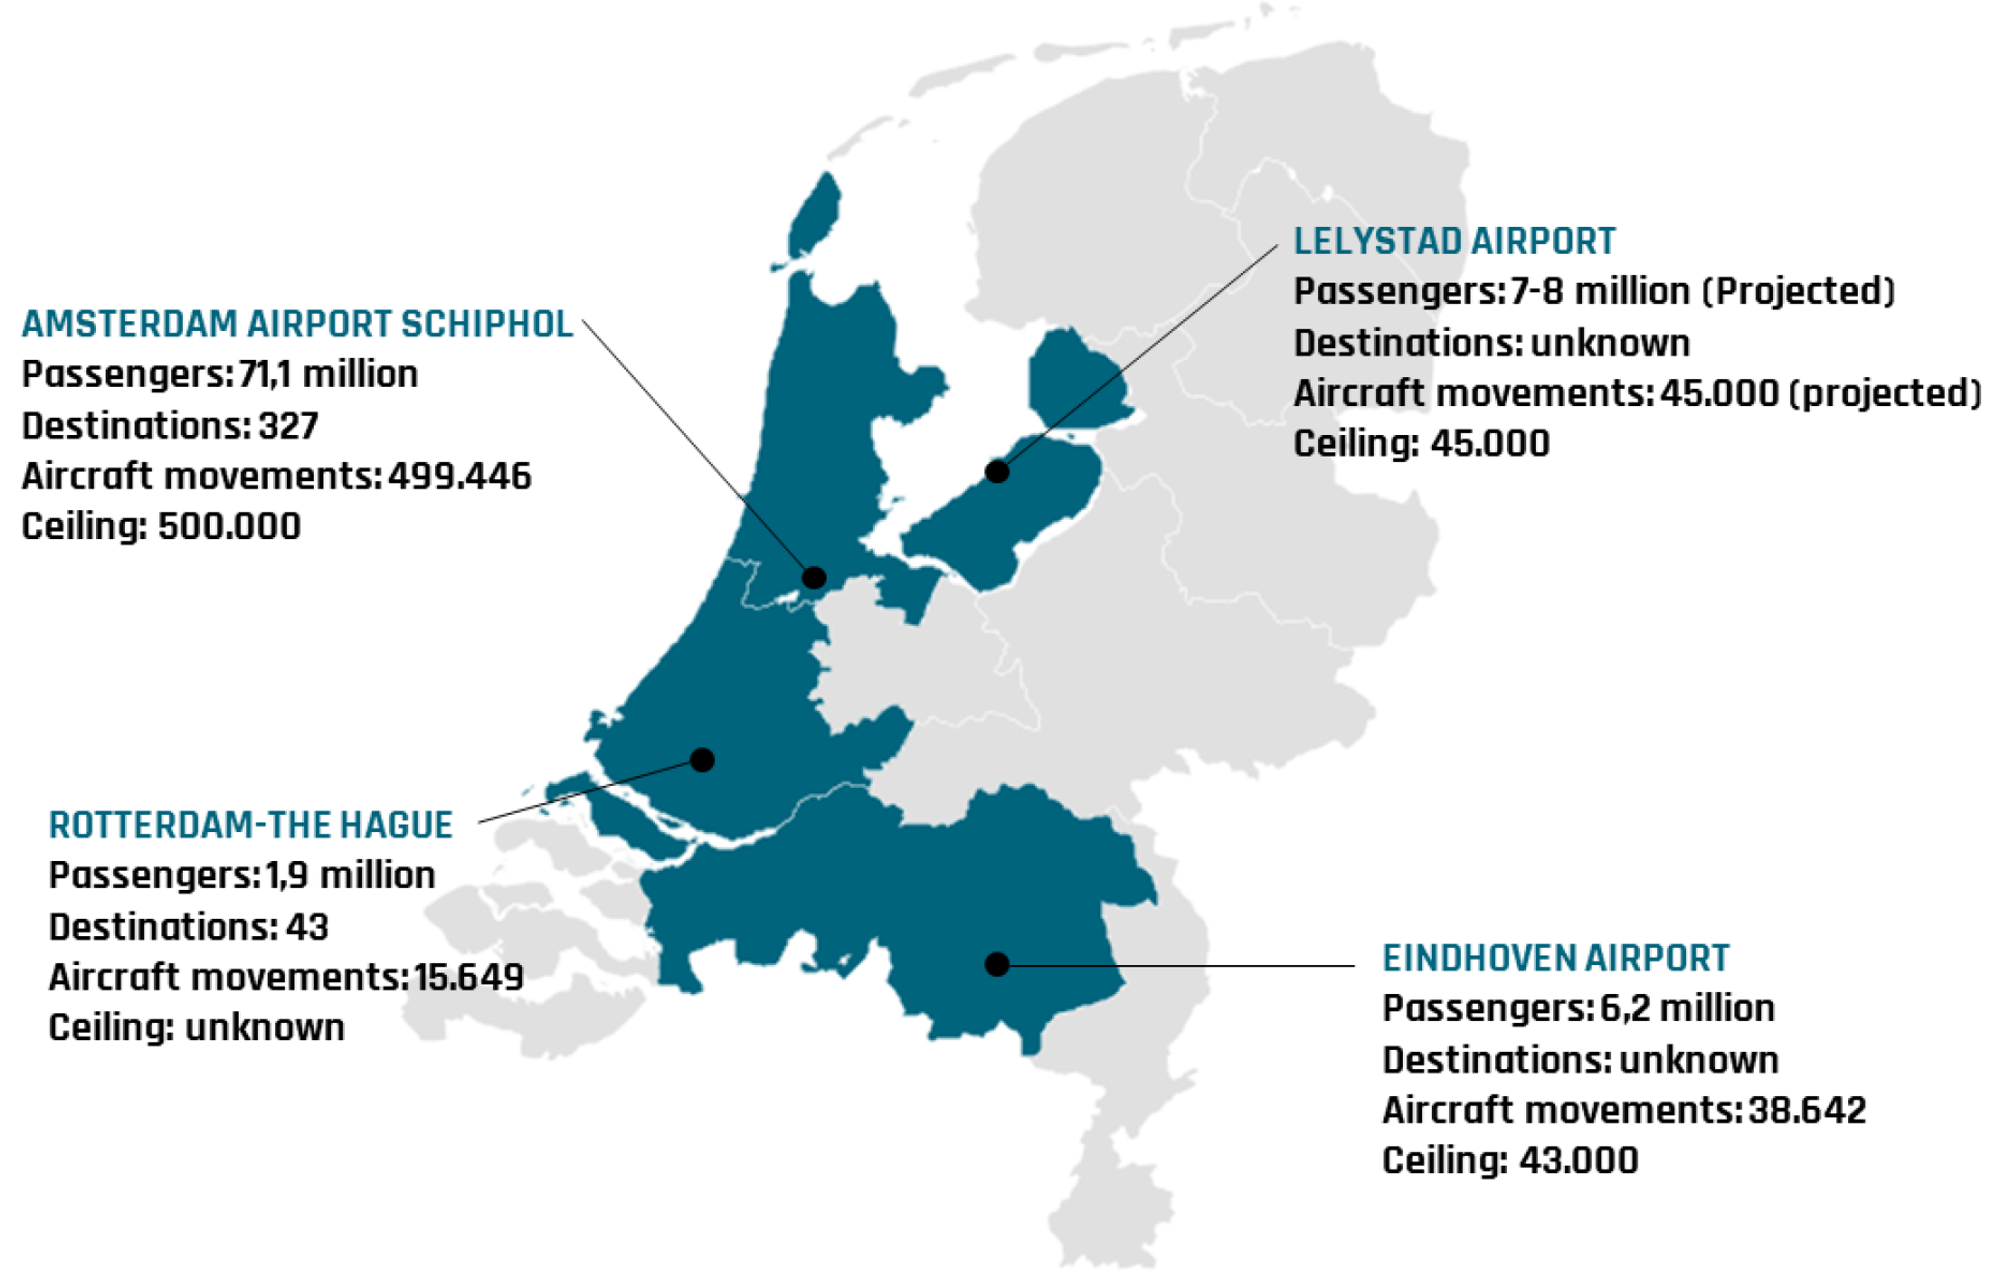 Dutch airports operated/majority share of Royal Schiphol Group.